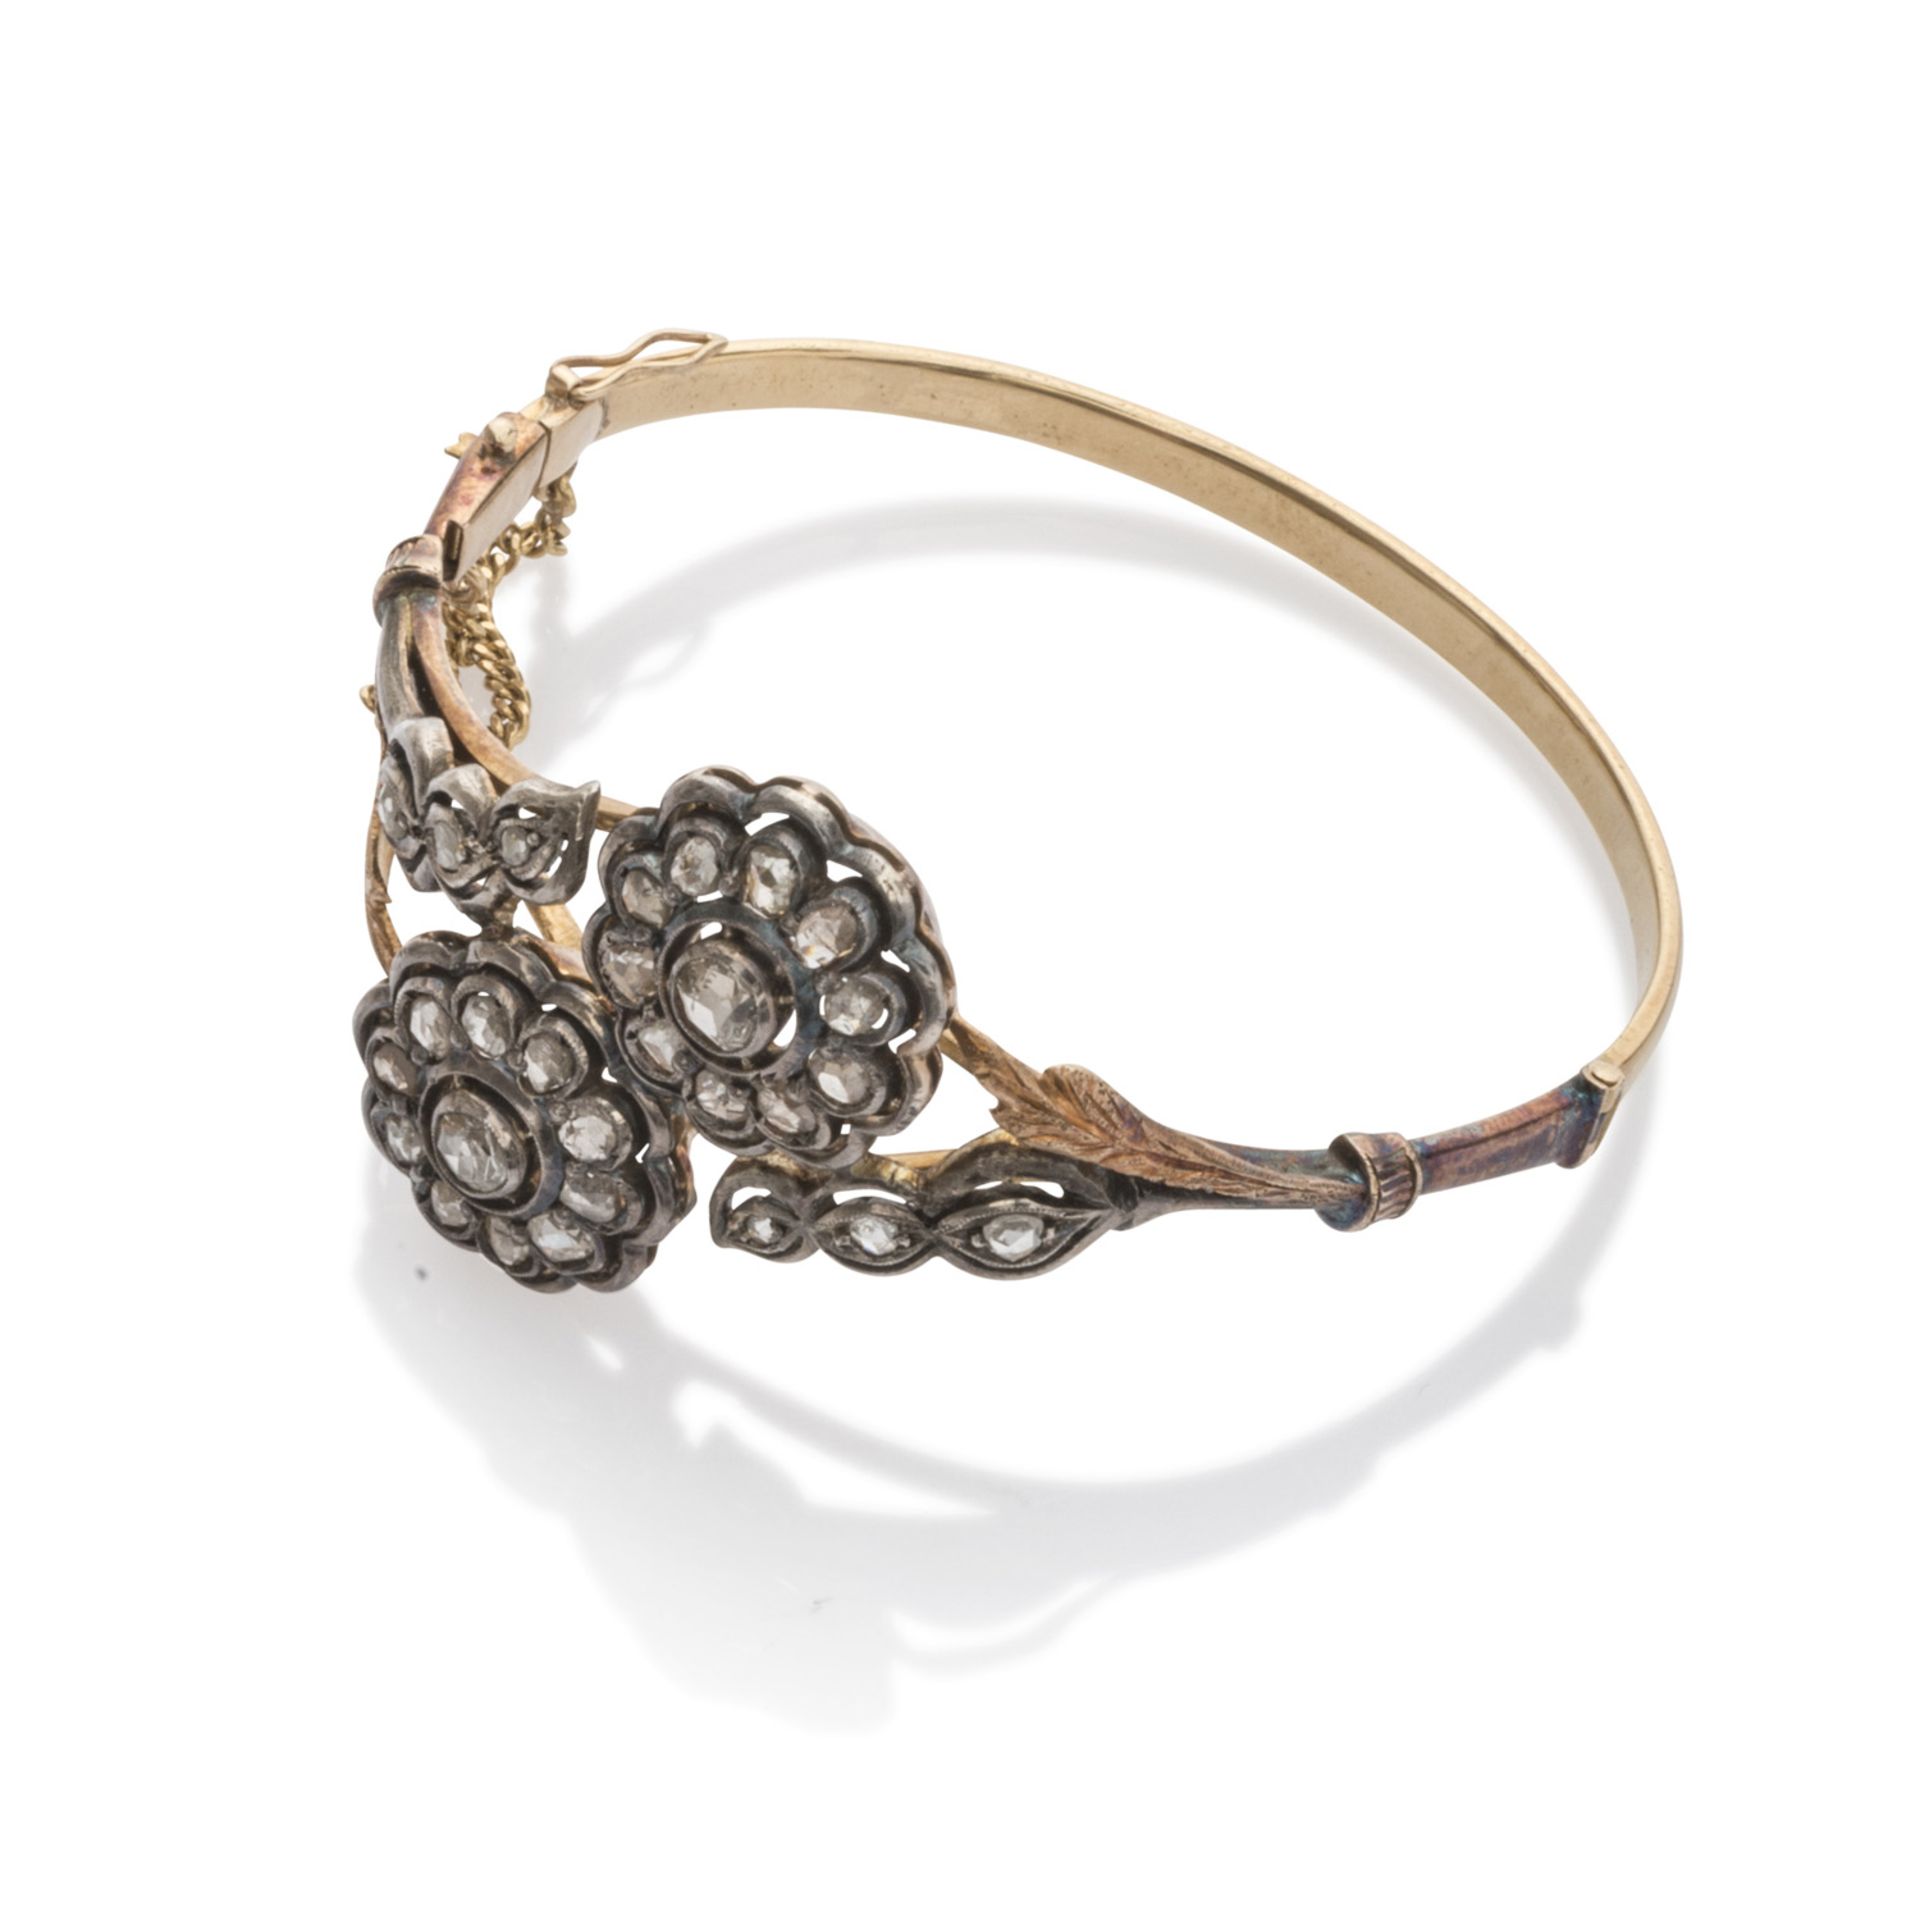 SLENDIDO BRACCIALE in gold and silver, decorated with flowers and leaves embellished with rose cut